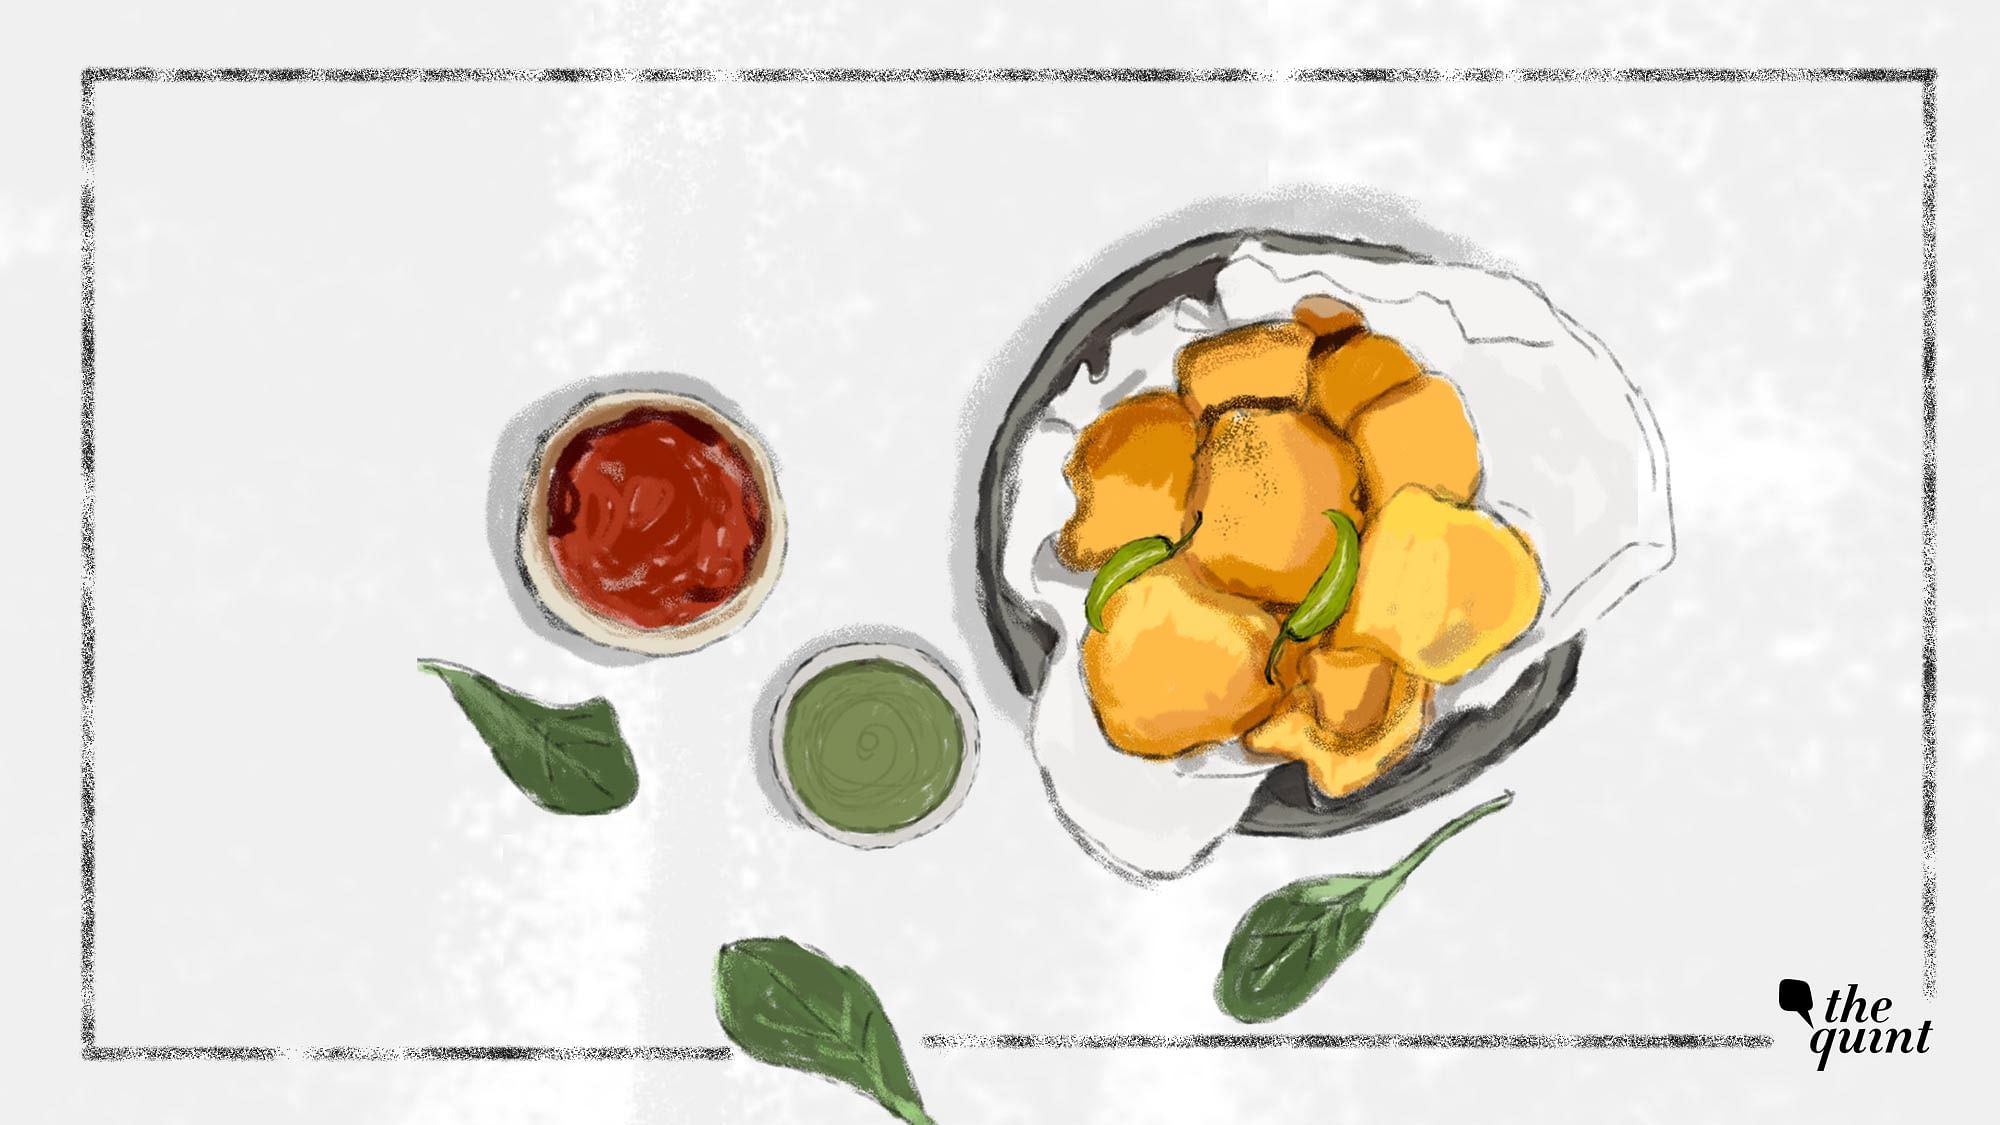 The<i> pakoda</i>, in all its avatars, represents what it means to be #Basic when it comes to <i>desi</i>-ness.